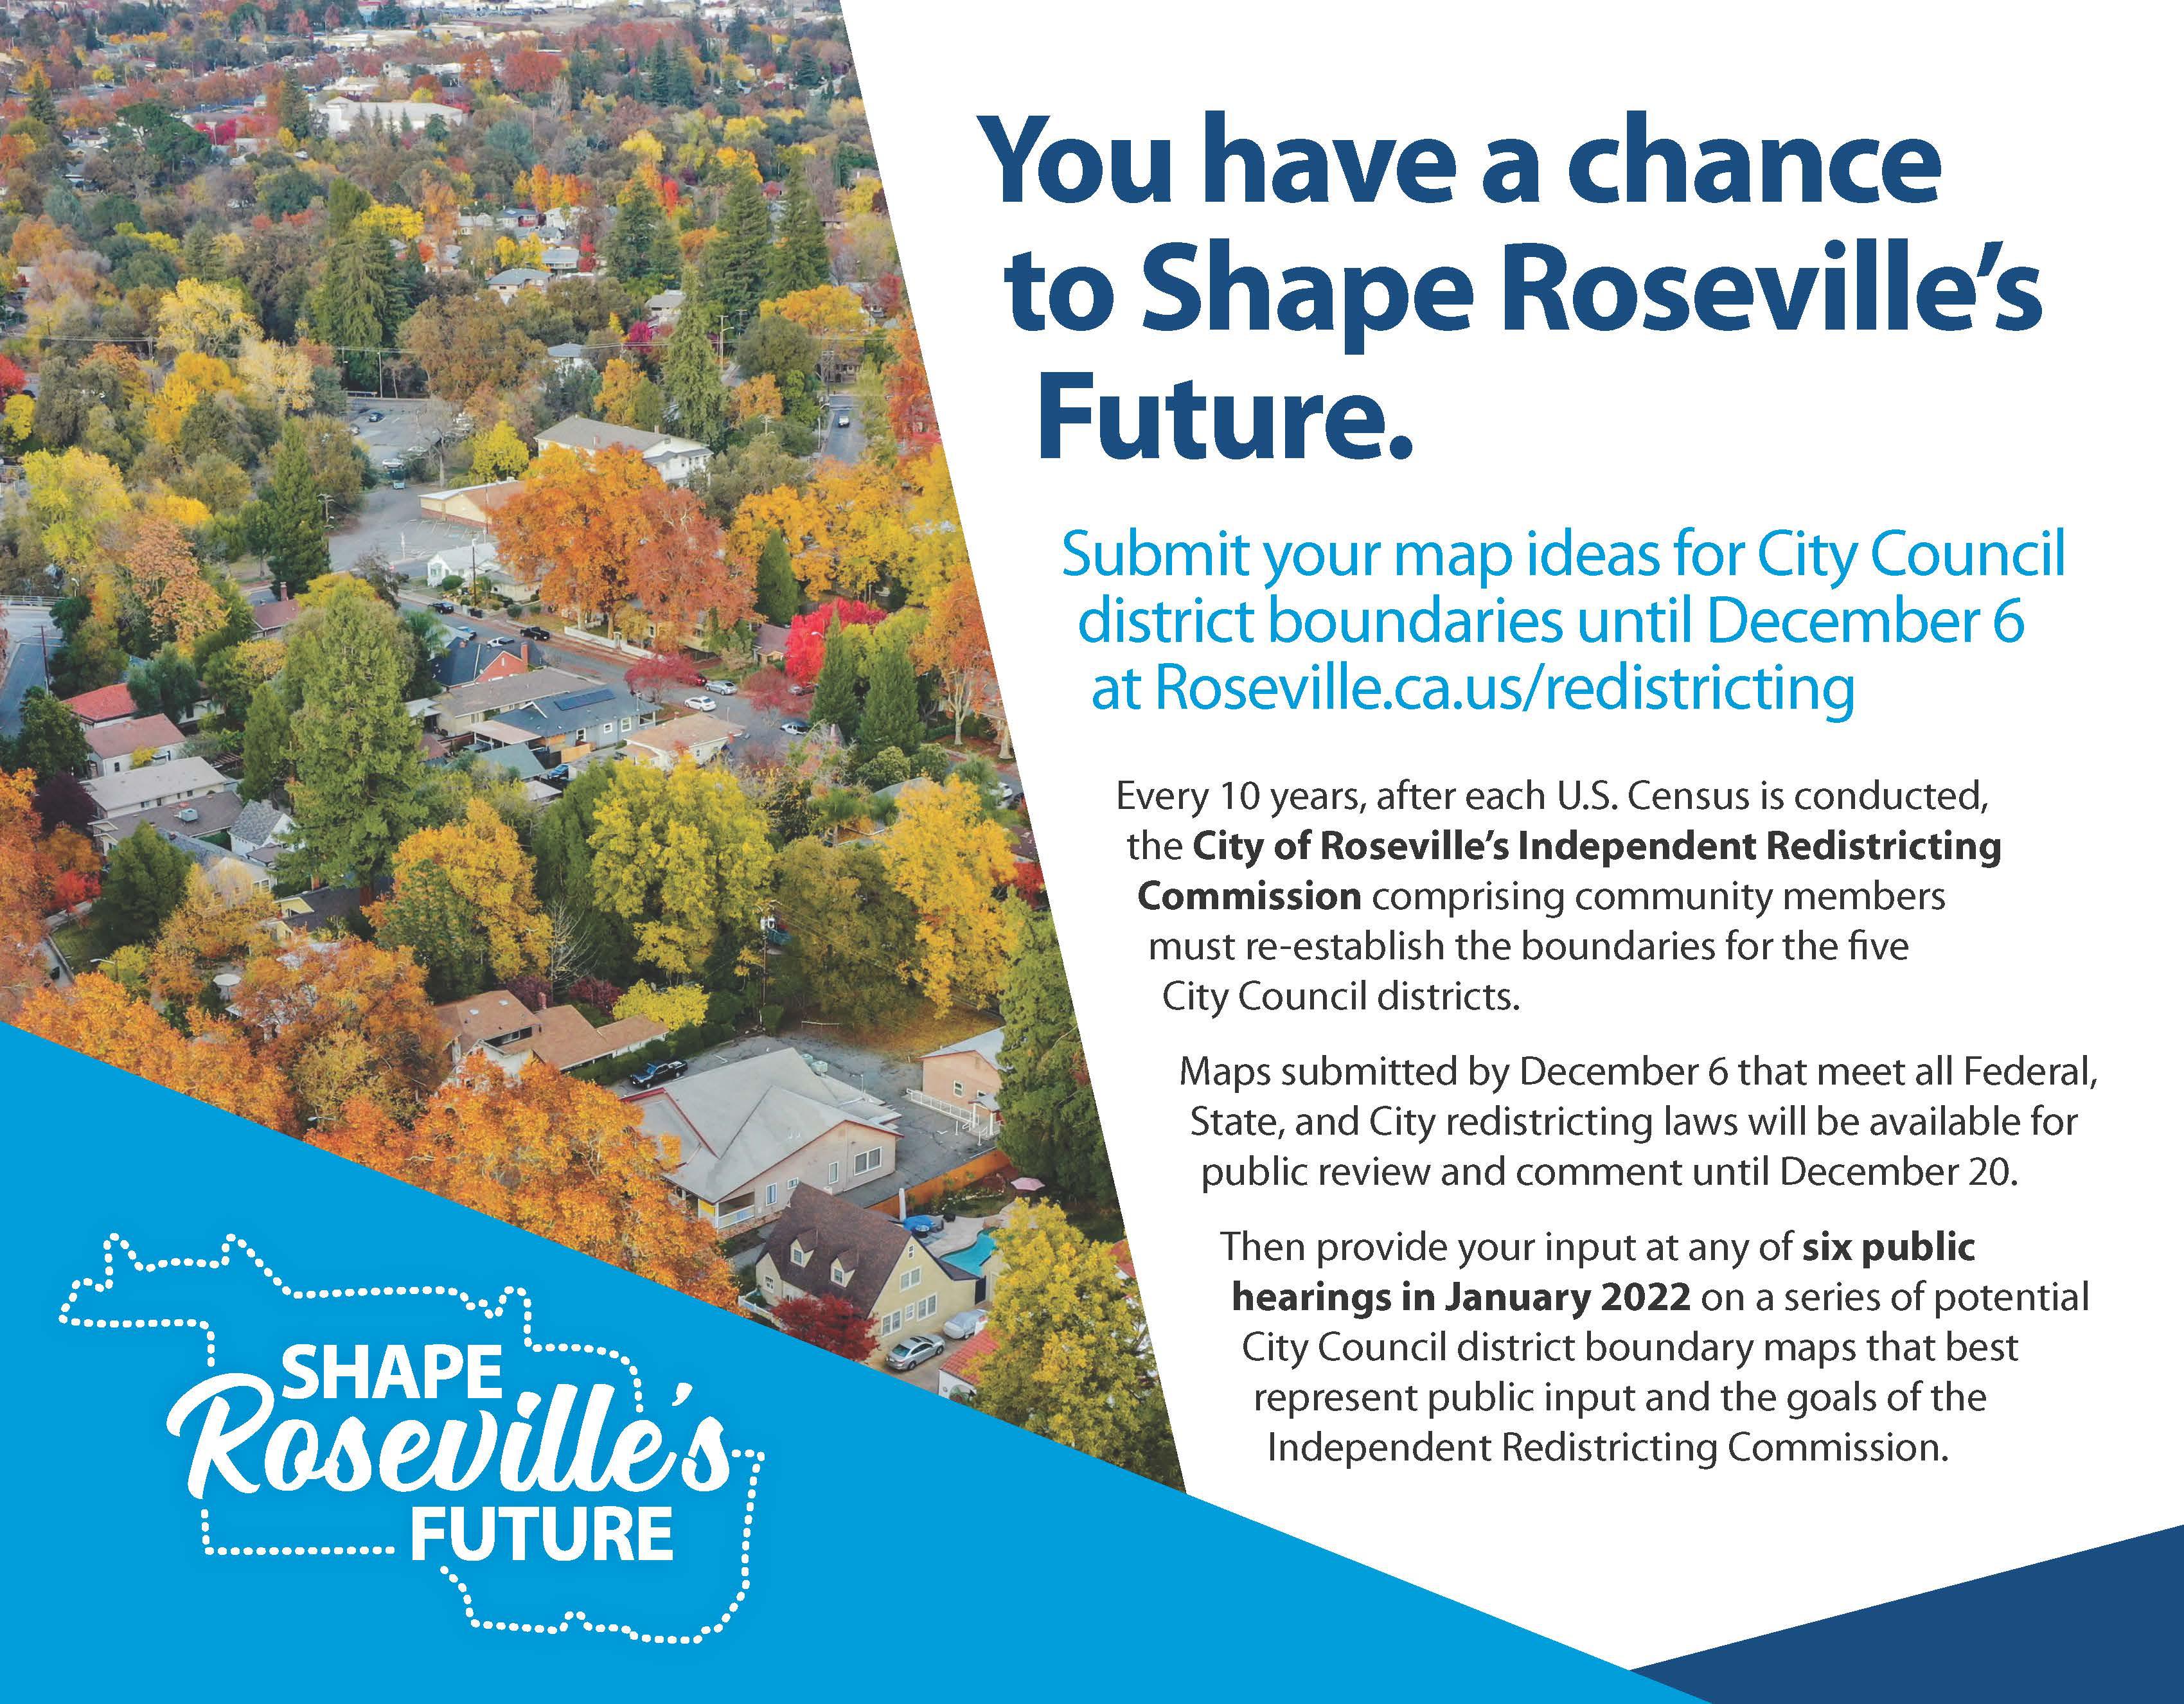 More information about "Shape Roseville's Future"